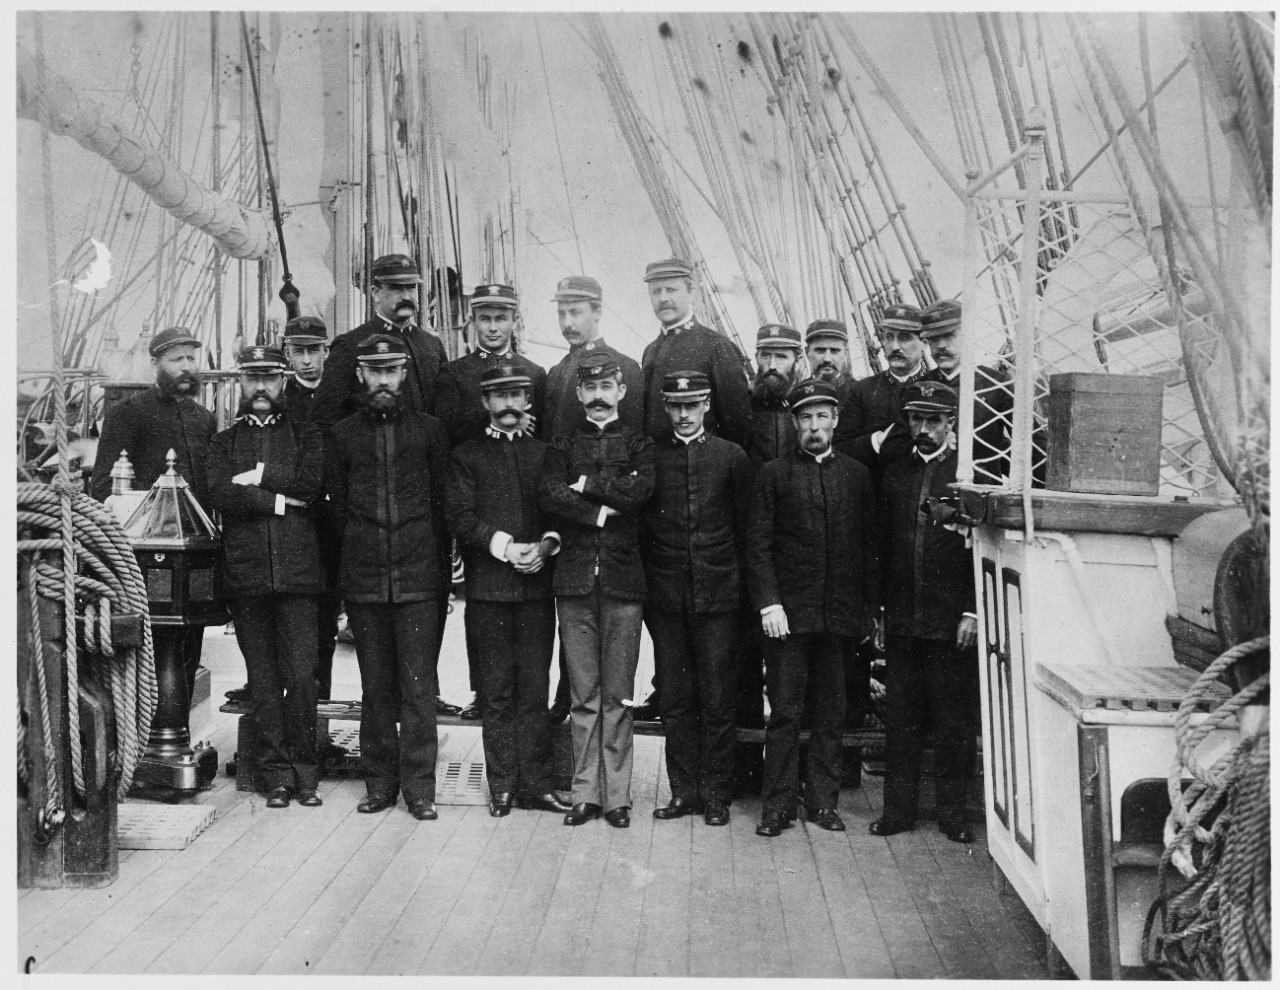 Officers of USS PORTSMOUTH, 1843-1915